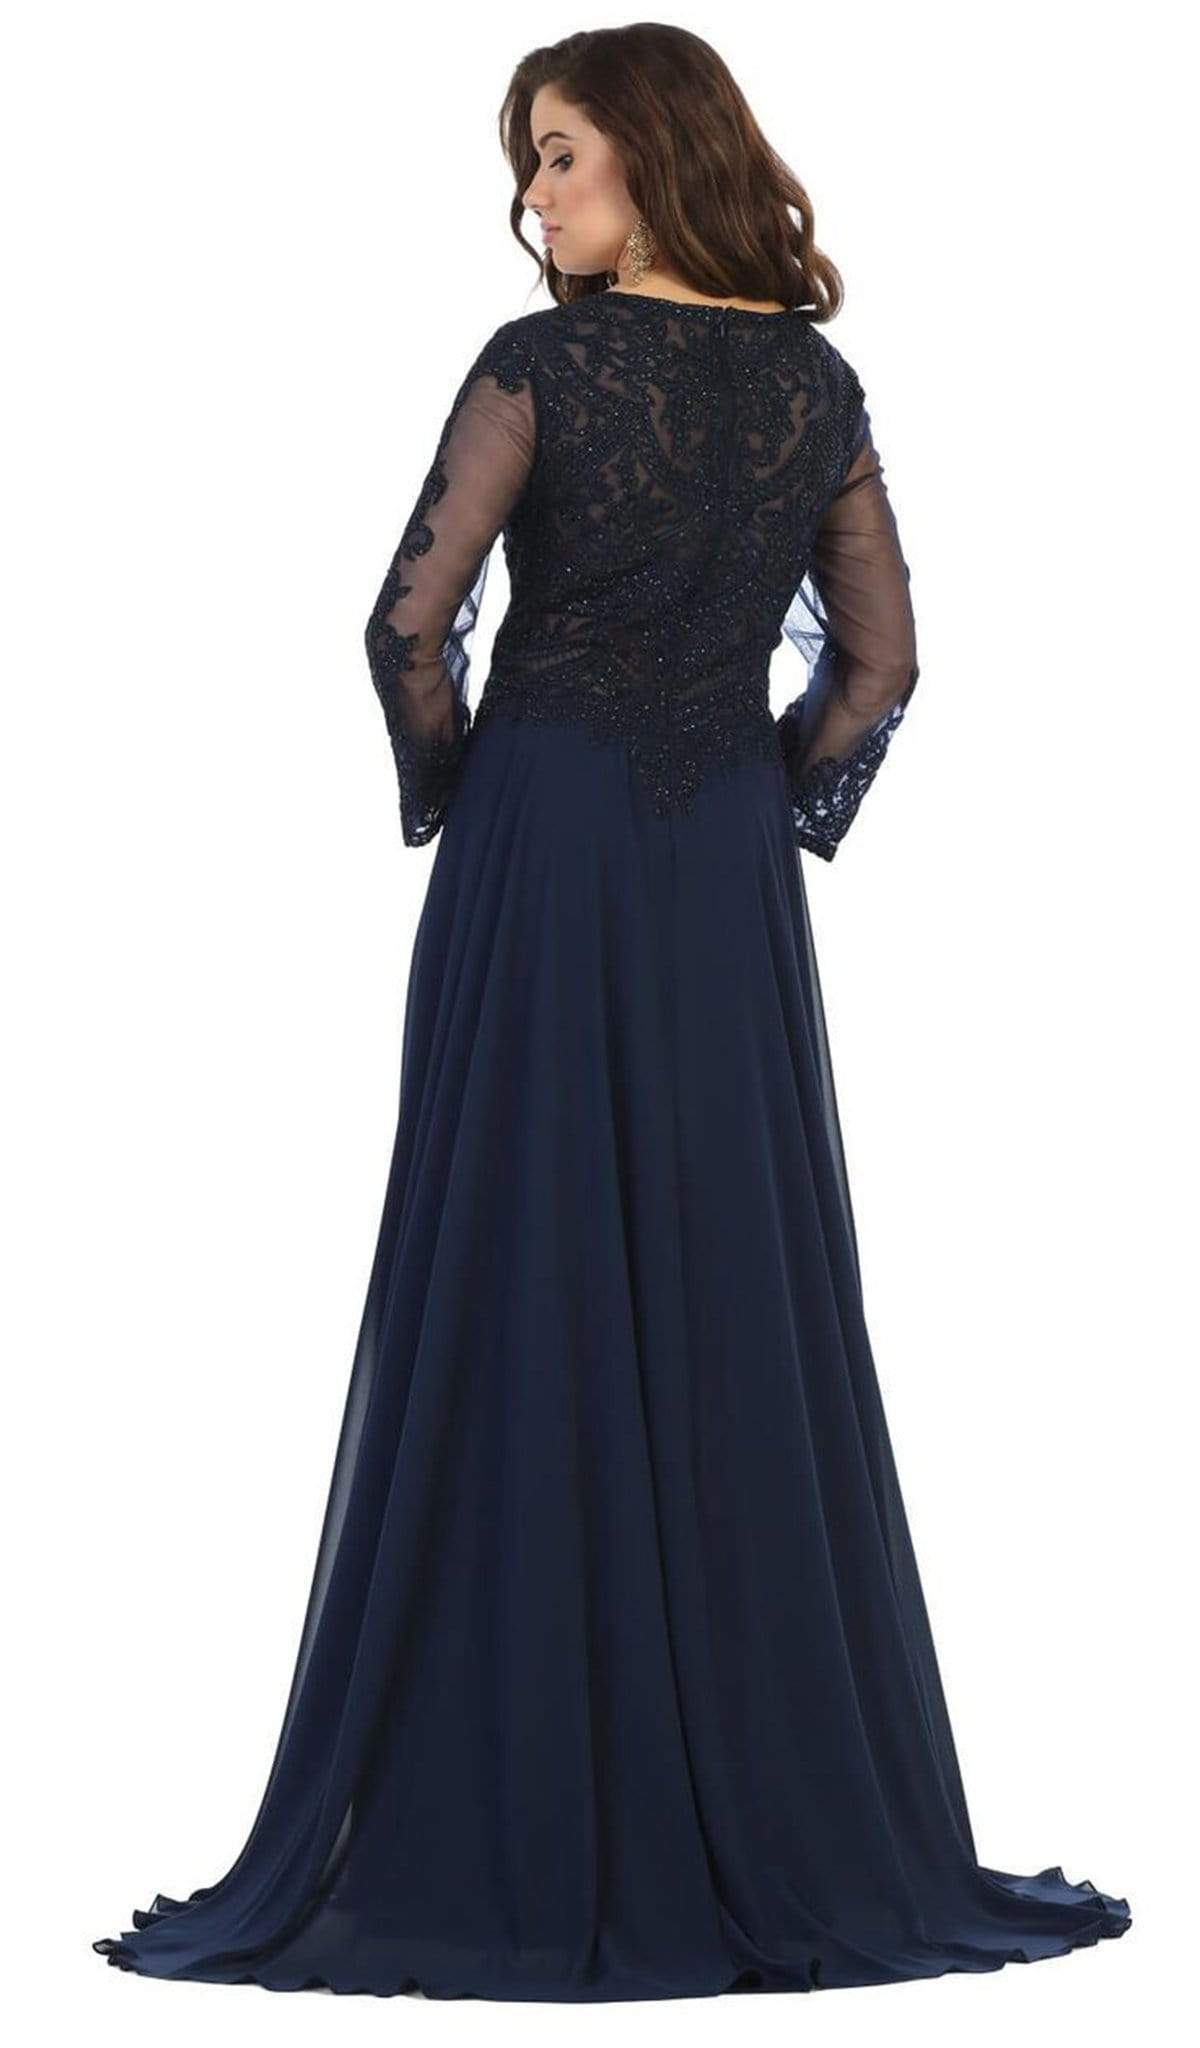 May Queen - MQ1615B Applique Long Sleeve A-line Dress Special Occasion Dress